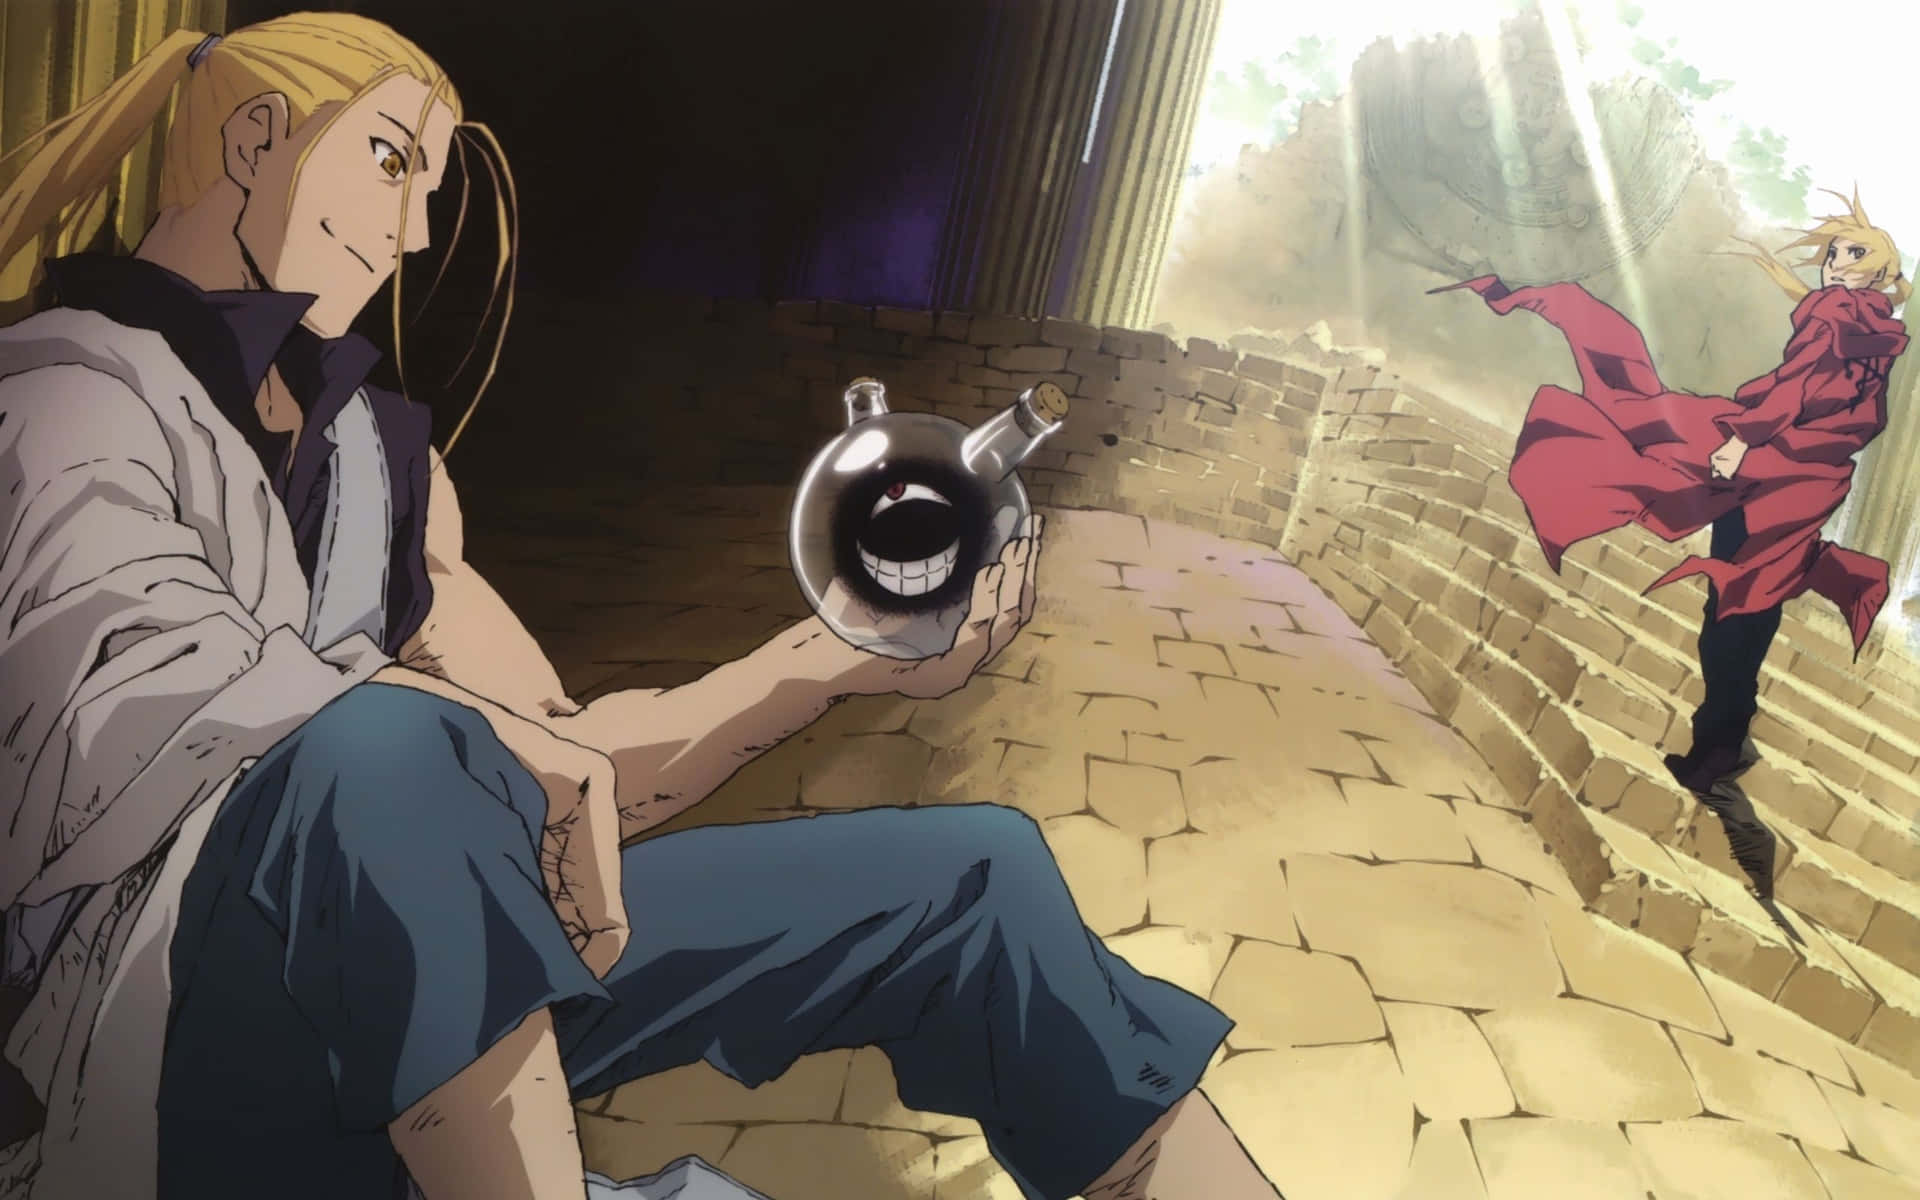 Two Brothers Sharing a Moment - Edward and Alphonse from Fullmetal Alchemist Brotherhood